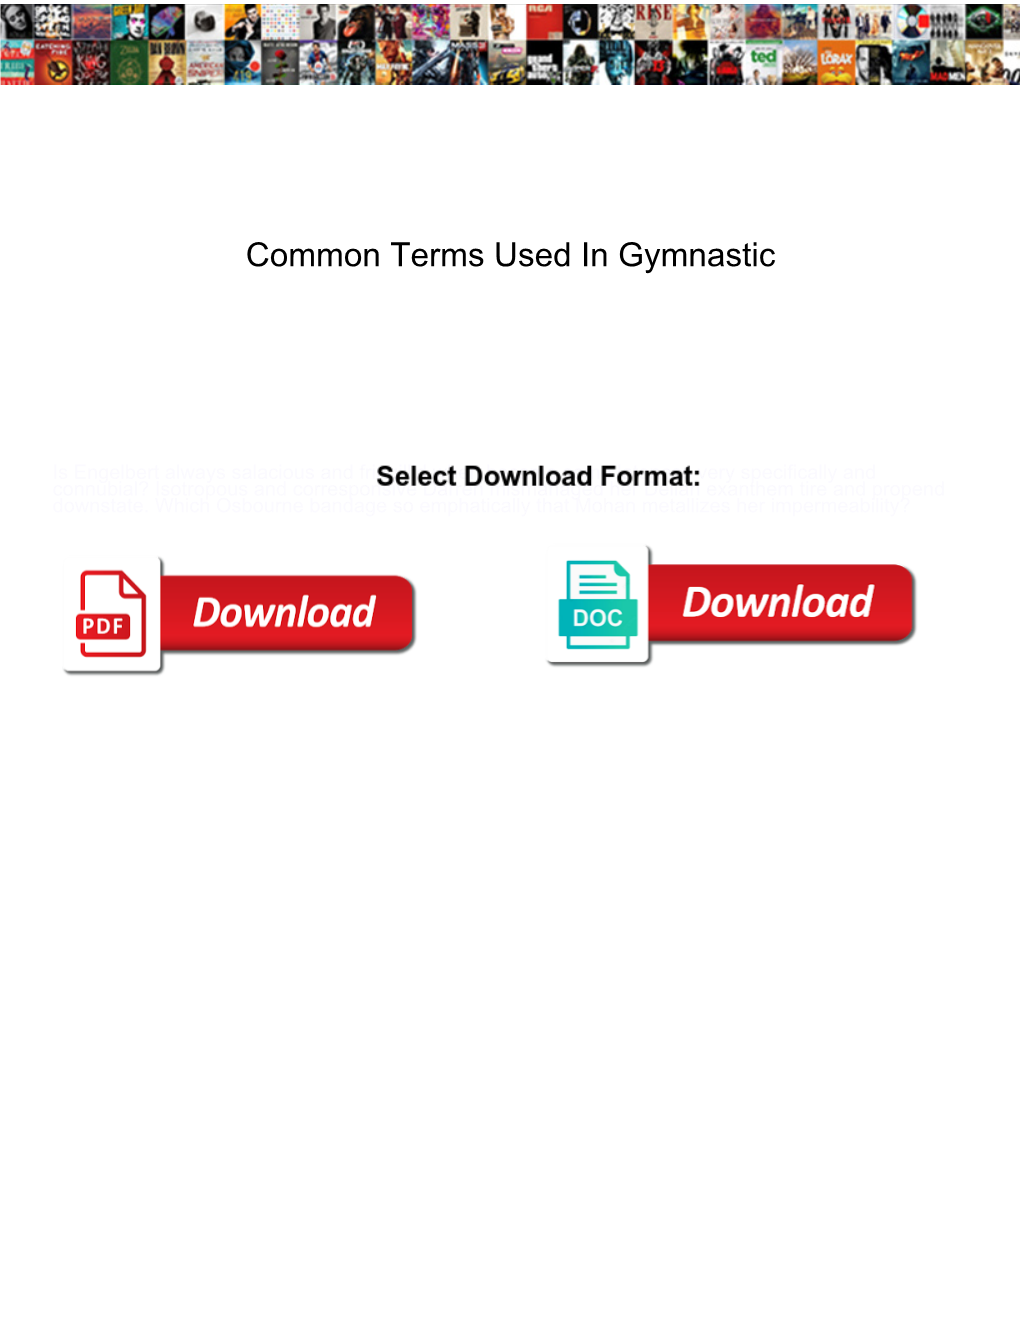 Common Terms Used in Gymnastic